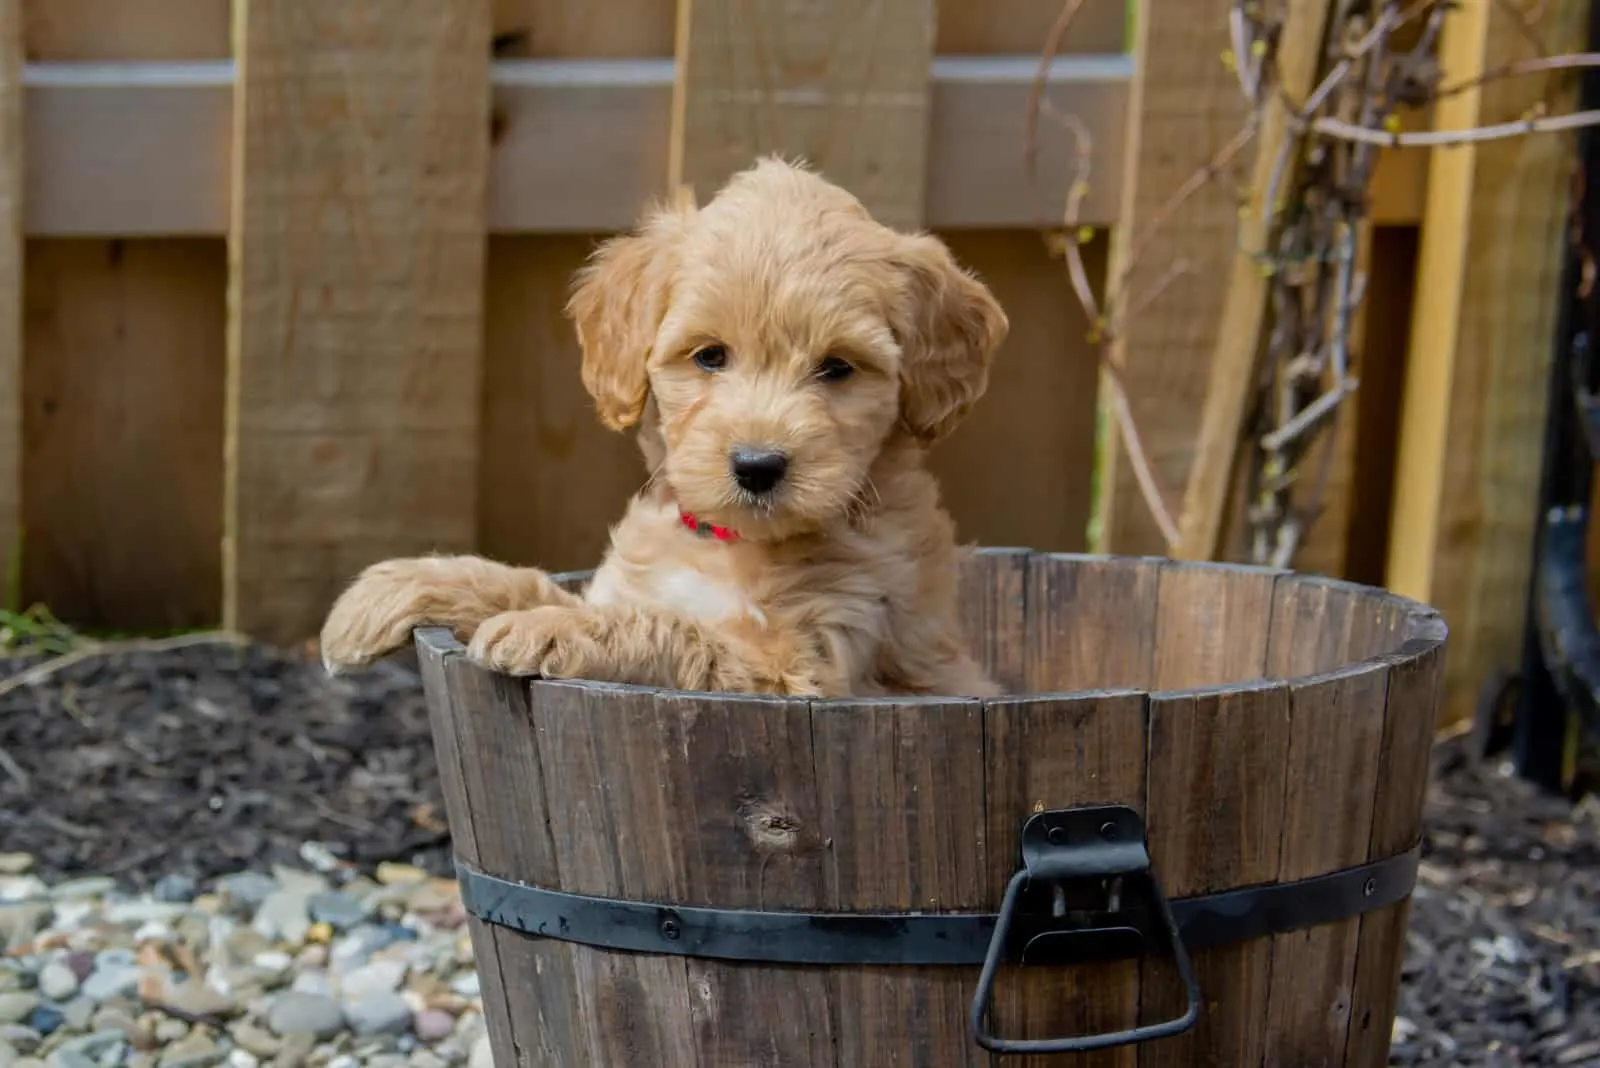 Mini Goldendoodle puppy stands in a bucket and looks around